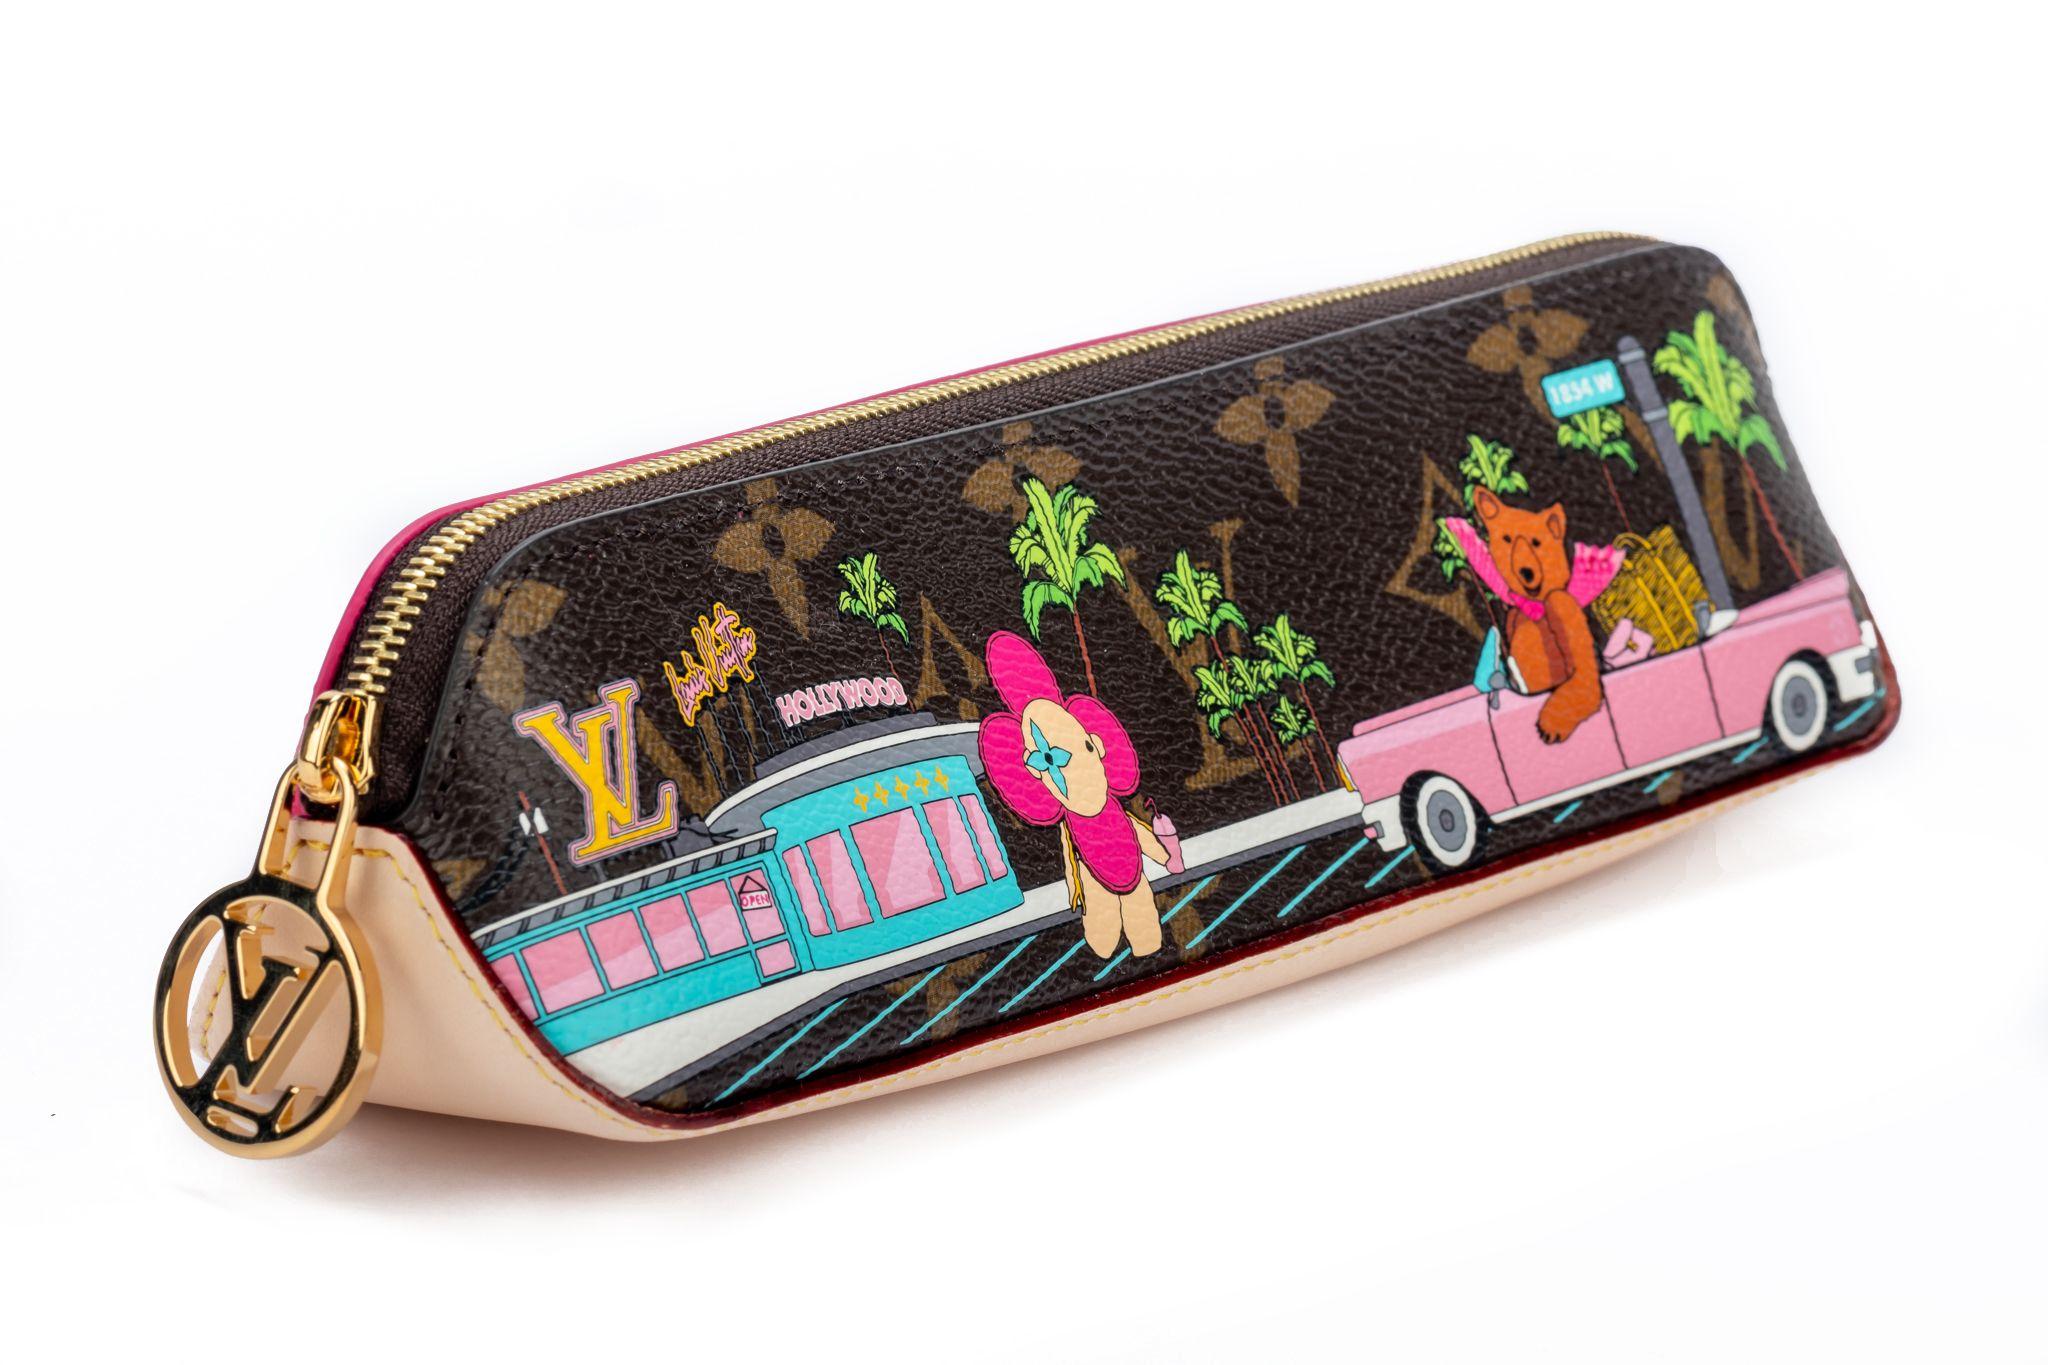 The Hollywood Xmas Elizabeth pencil case displays a joyful travel scene. It features House mascot Vivienne sipping a milkshake while a teddy bear drives along Rodeo Drive. This piece coordinates with items from the Leather Goods and Accessories